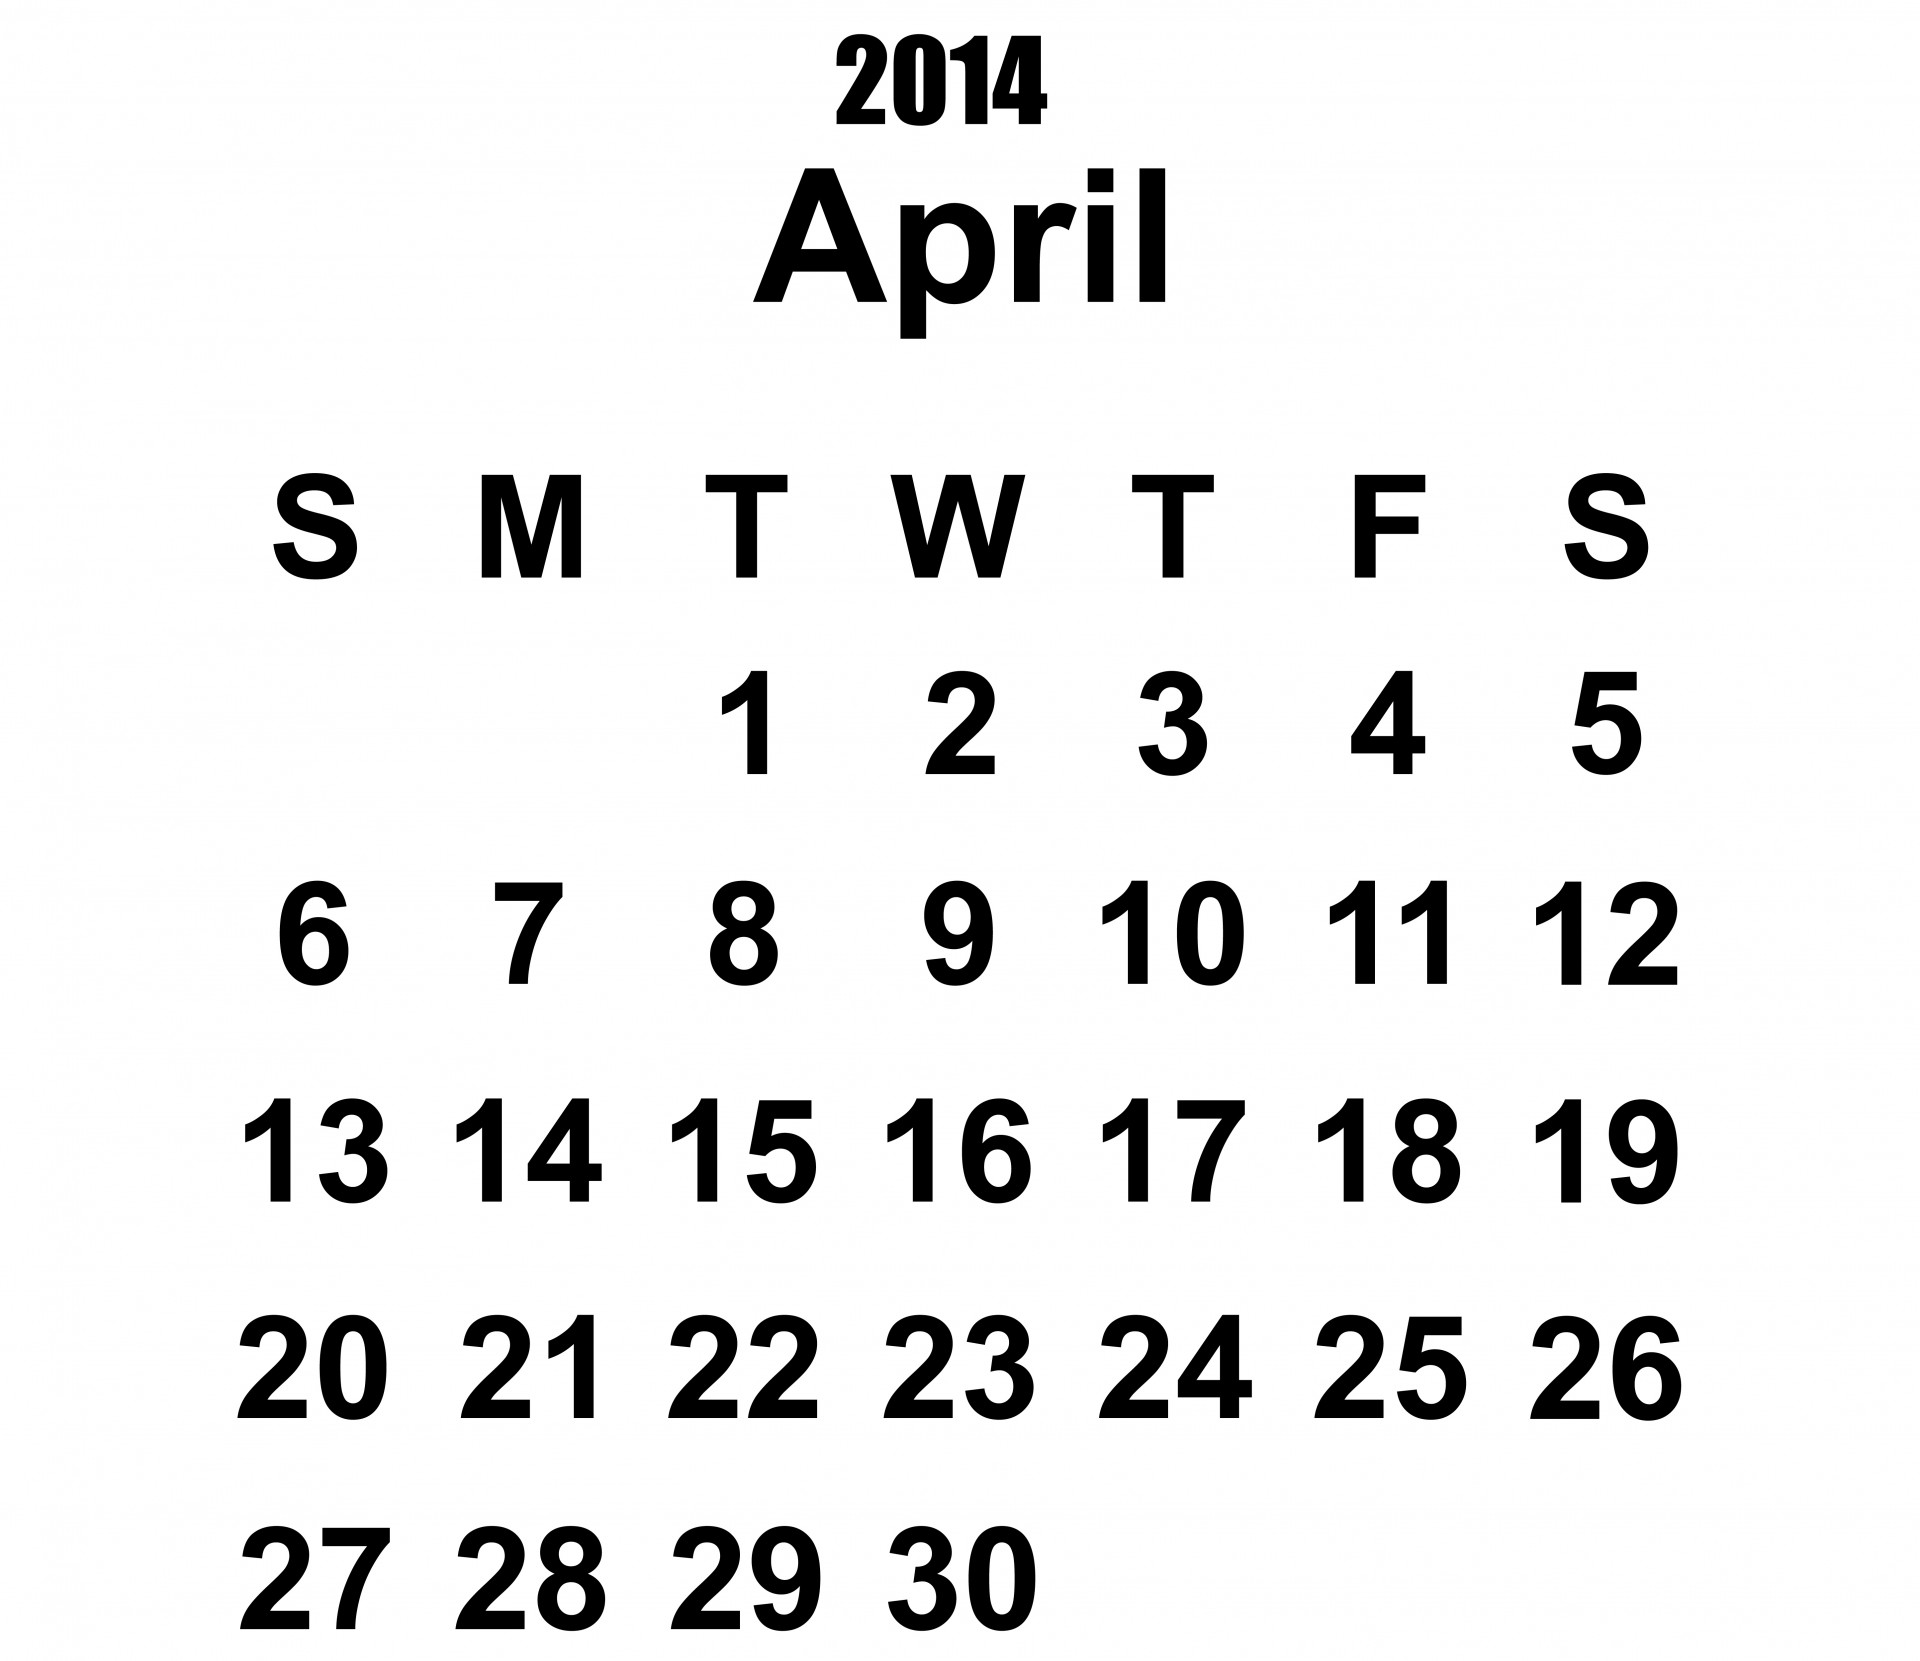 2104 calendar april,2014 calendar,2104,april,calendar free image from